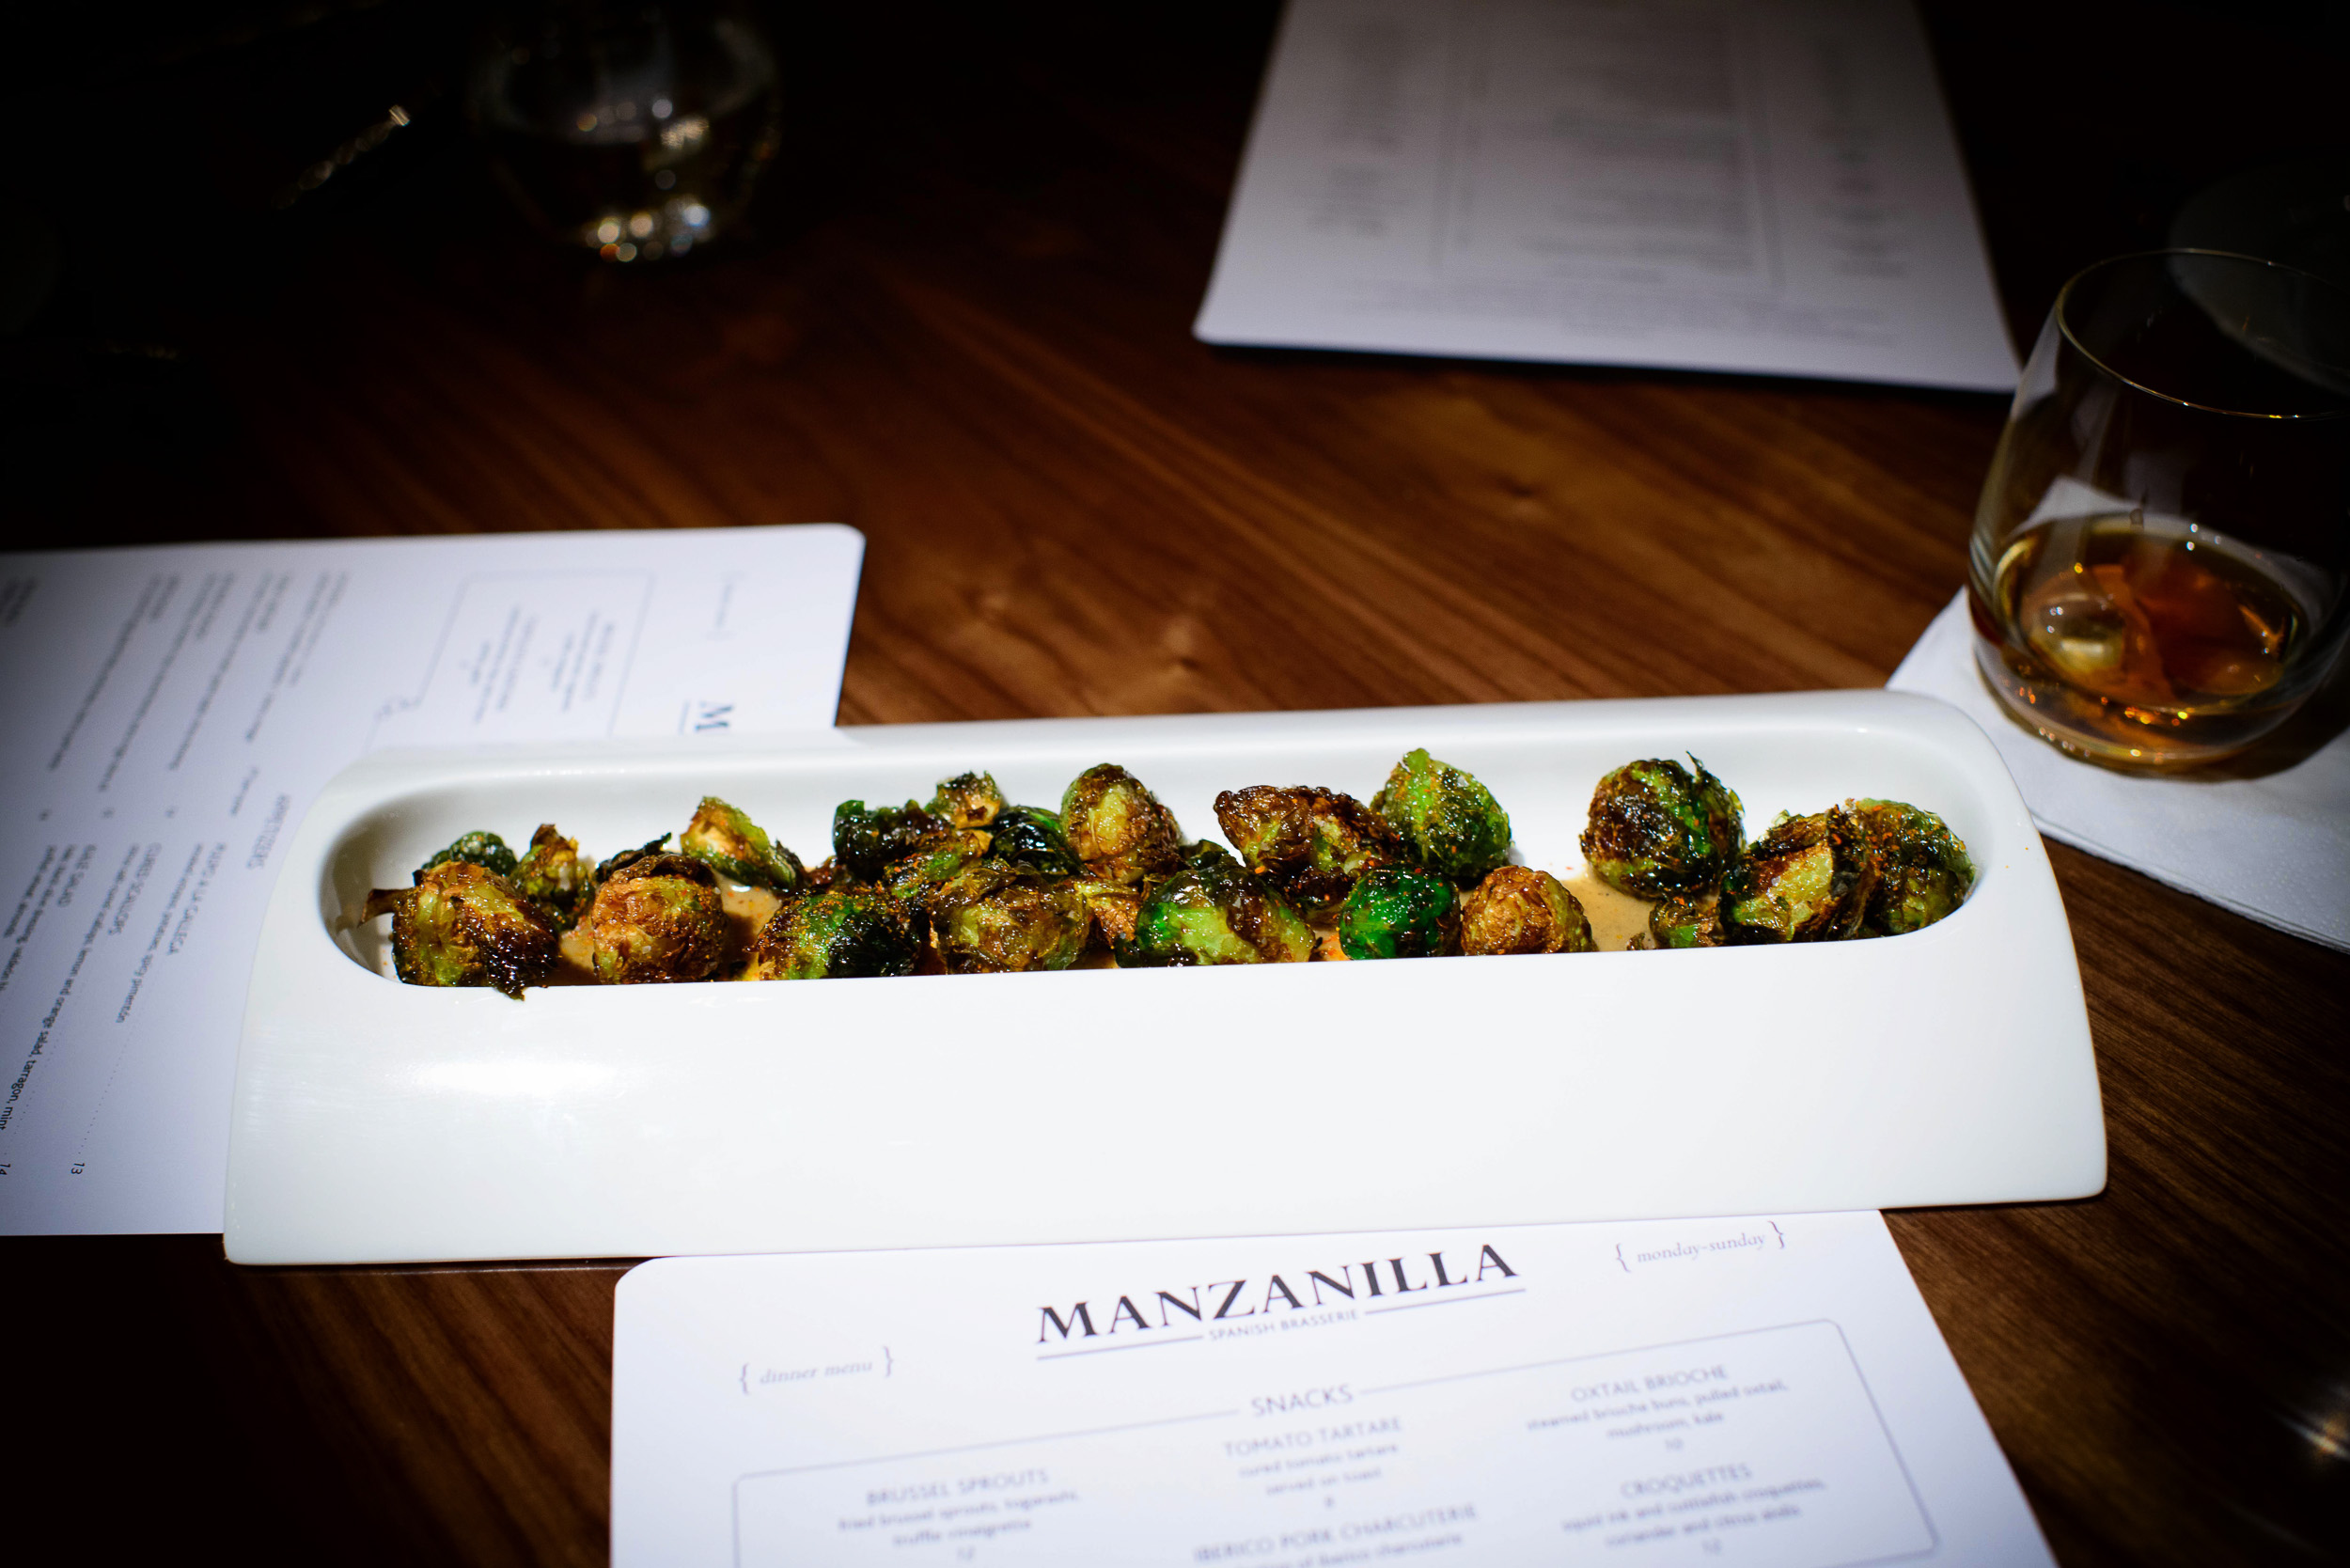 Brussel sprouts: fried brussel sprouts, togarashi, truffle vinai